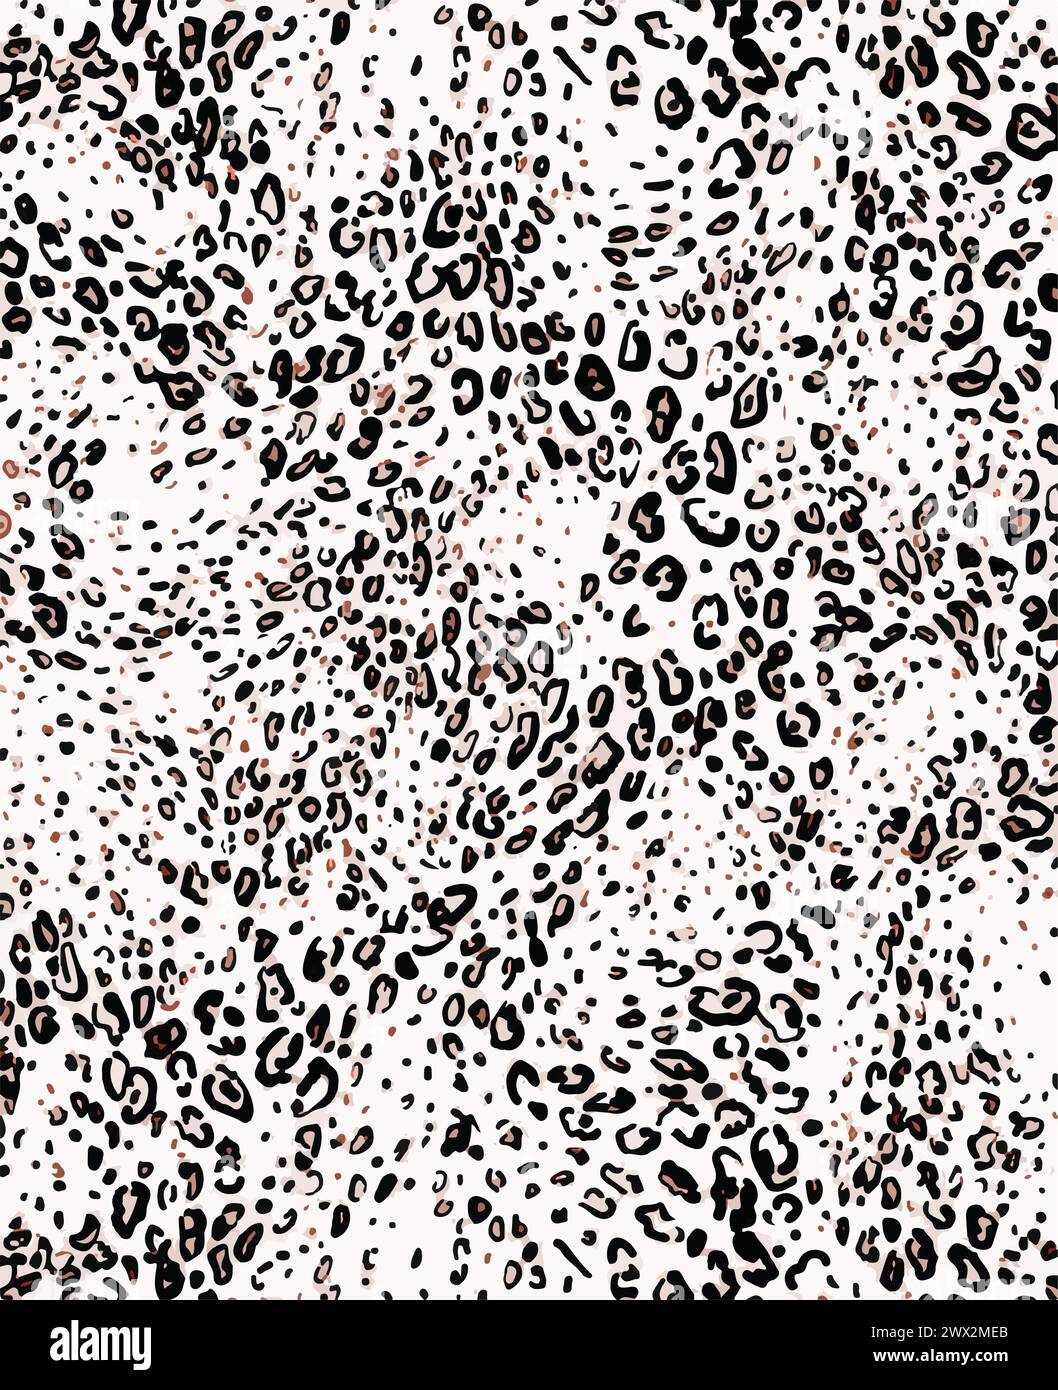 Leopard print. Vector seamless pattern. Animal skin background with black and brown spots on beige backdrop. Abstract exotic safari texture. Jaguar, l Stock Vector